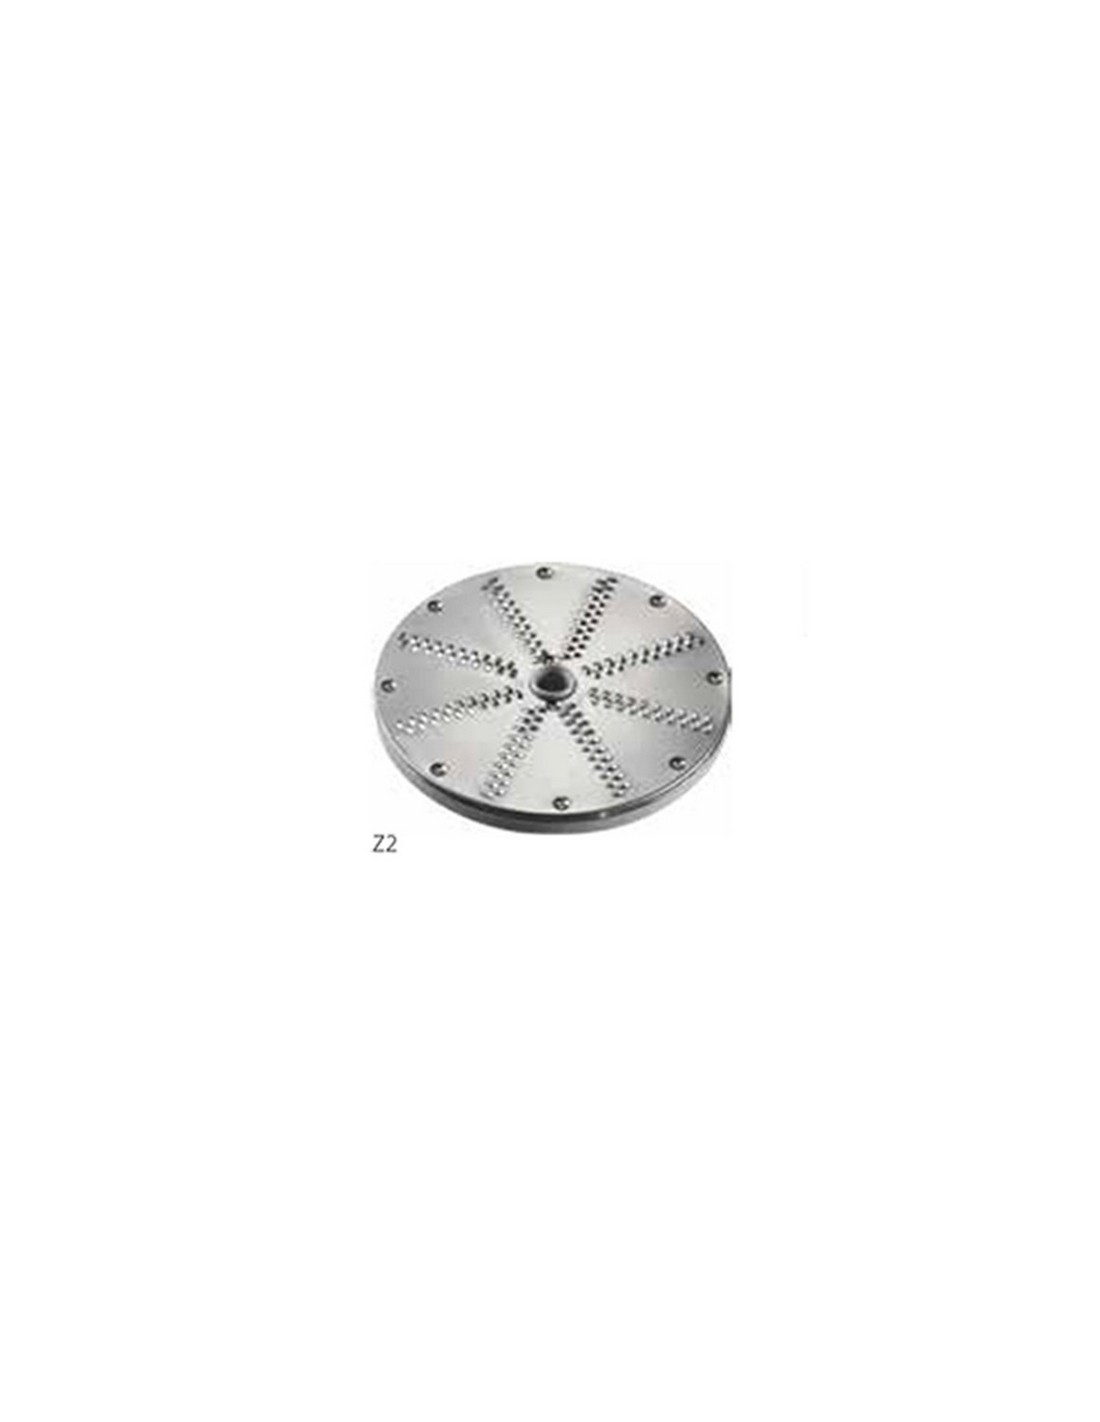 Disc for fraying carrots, celery, potatoes, apples, turnips - Thickness mm 2